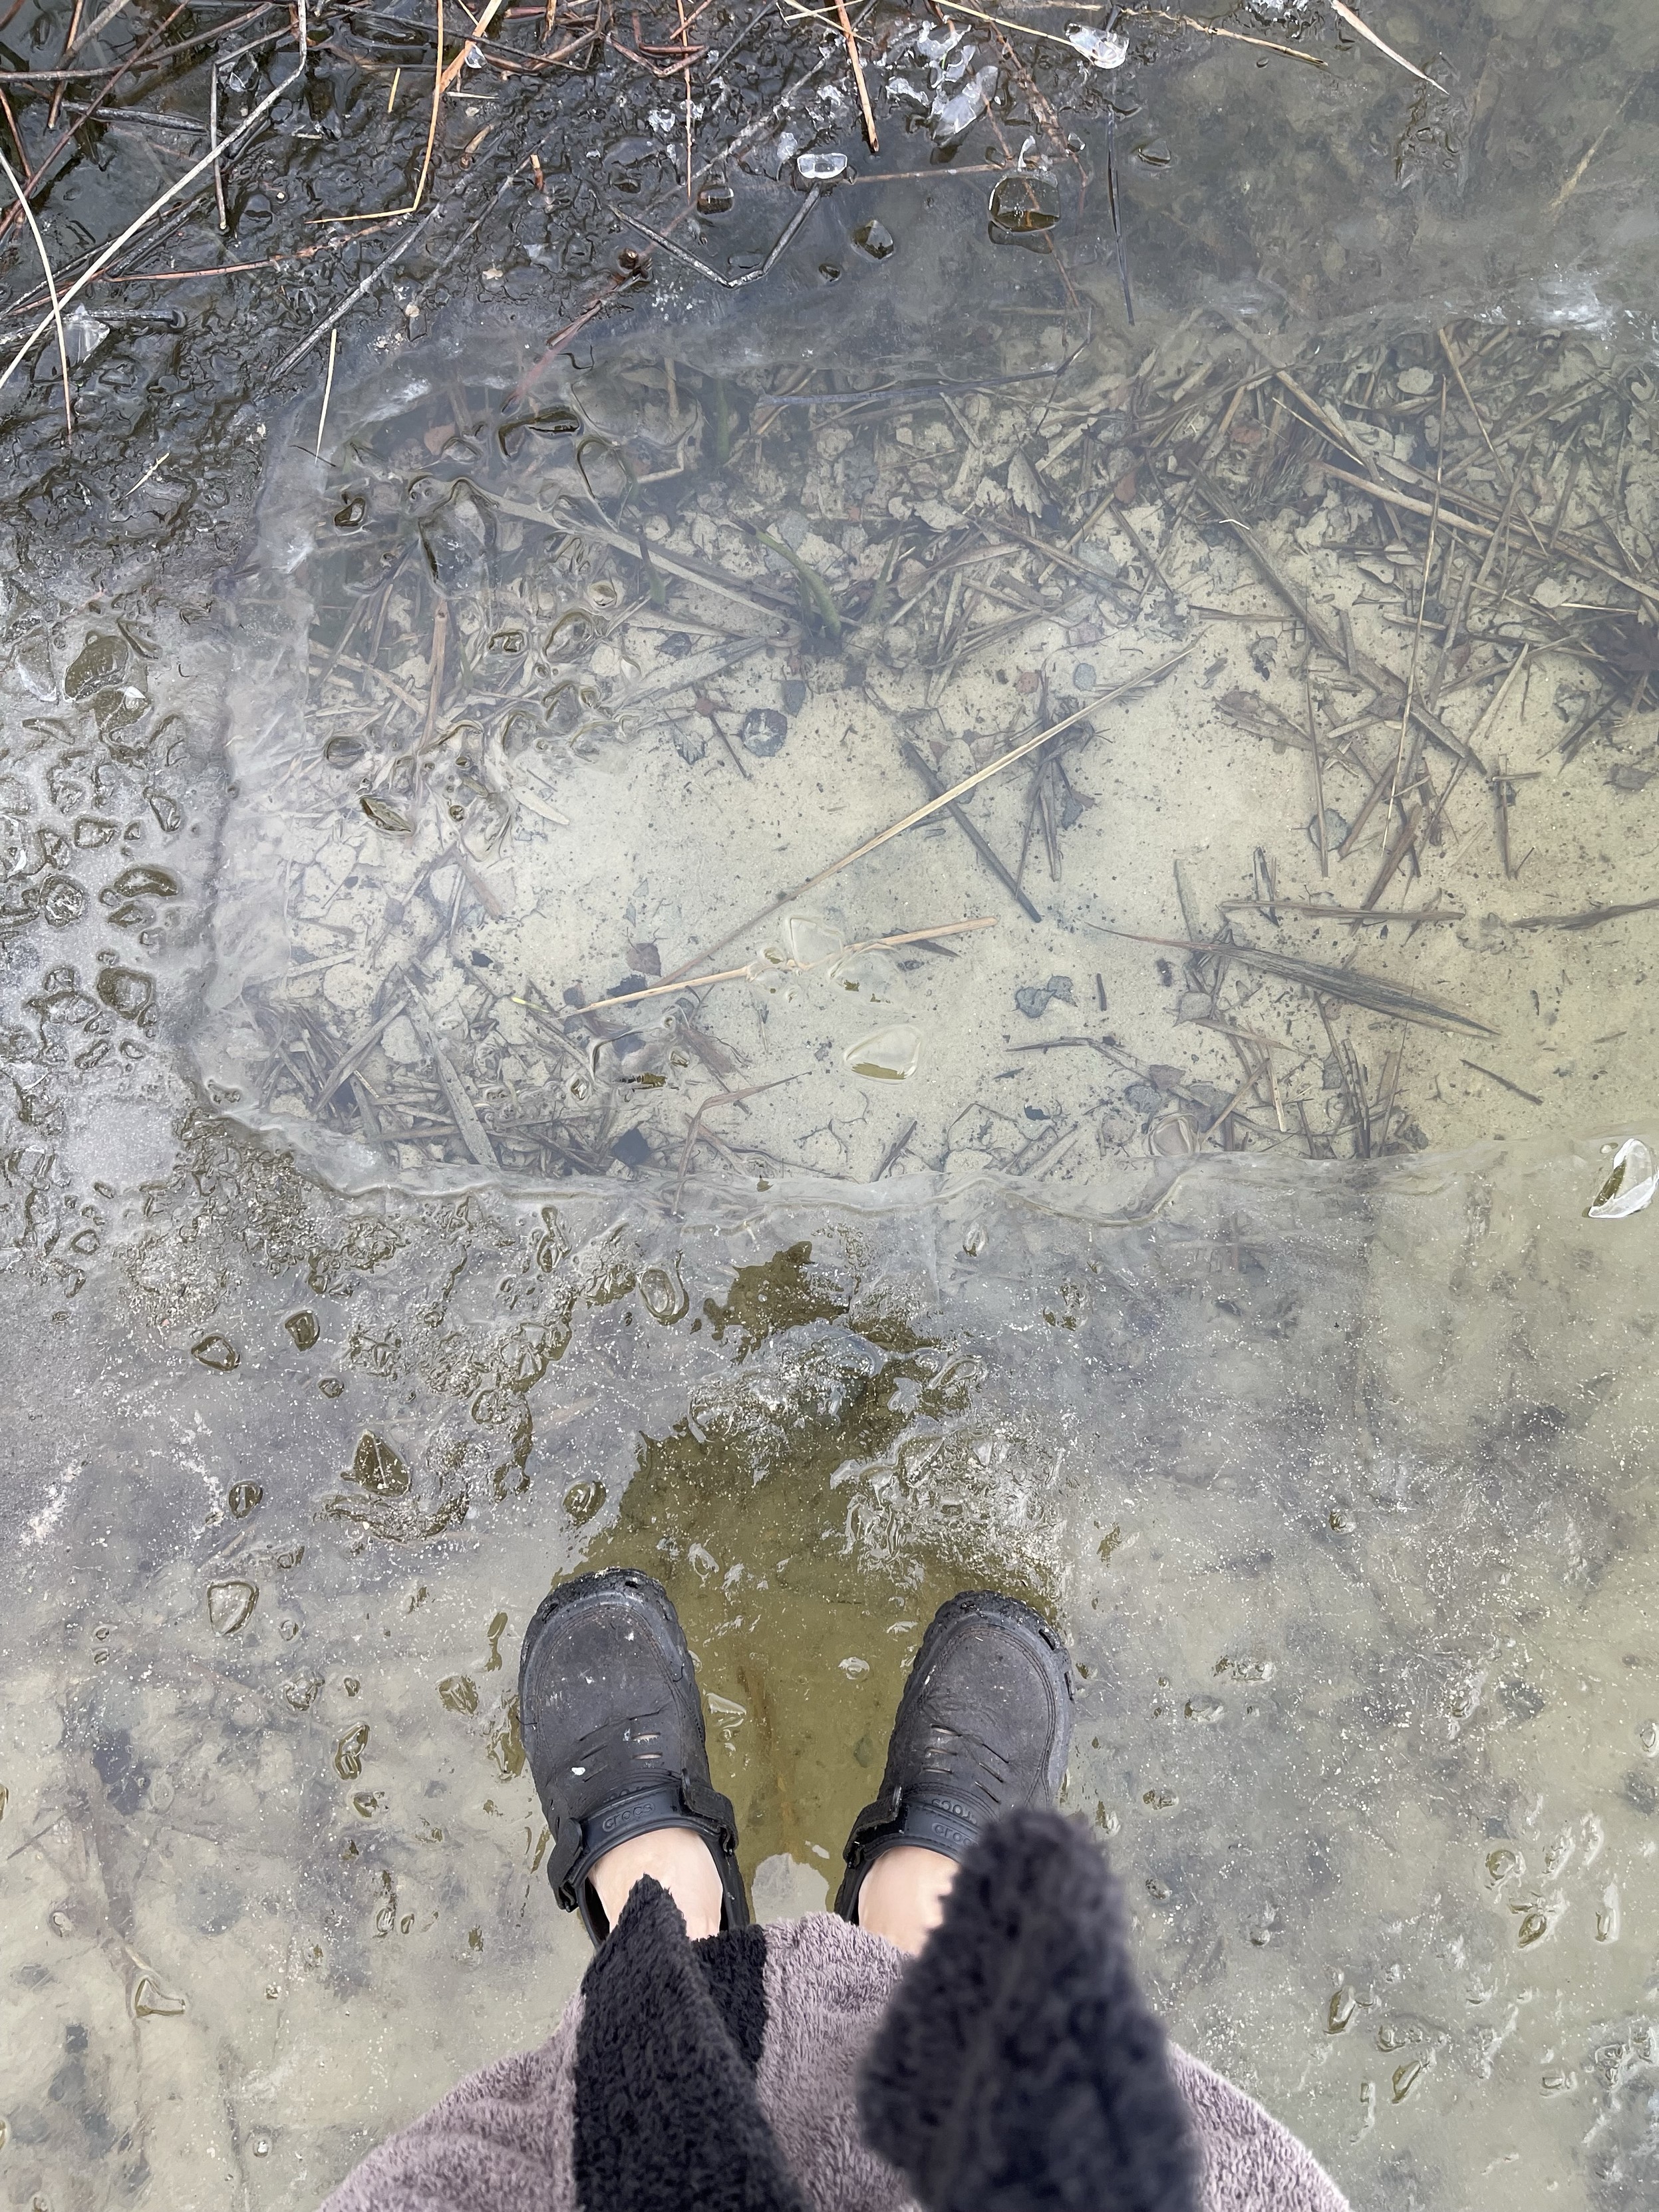 Person standing on ice at the edge of clear water with visible underwater plants and mud, wearing black shoes.